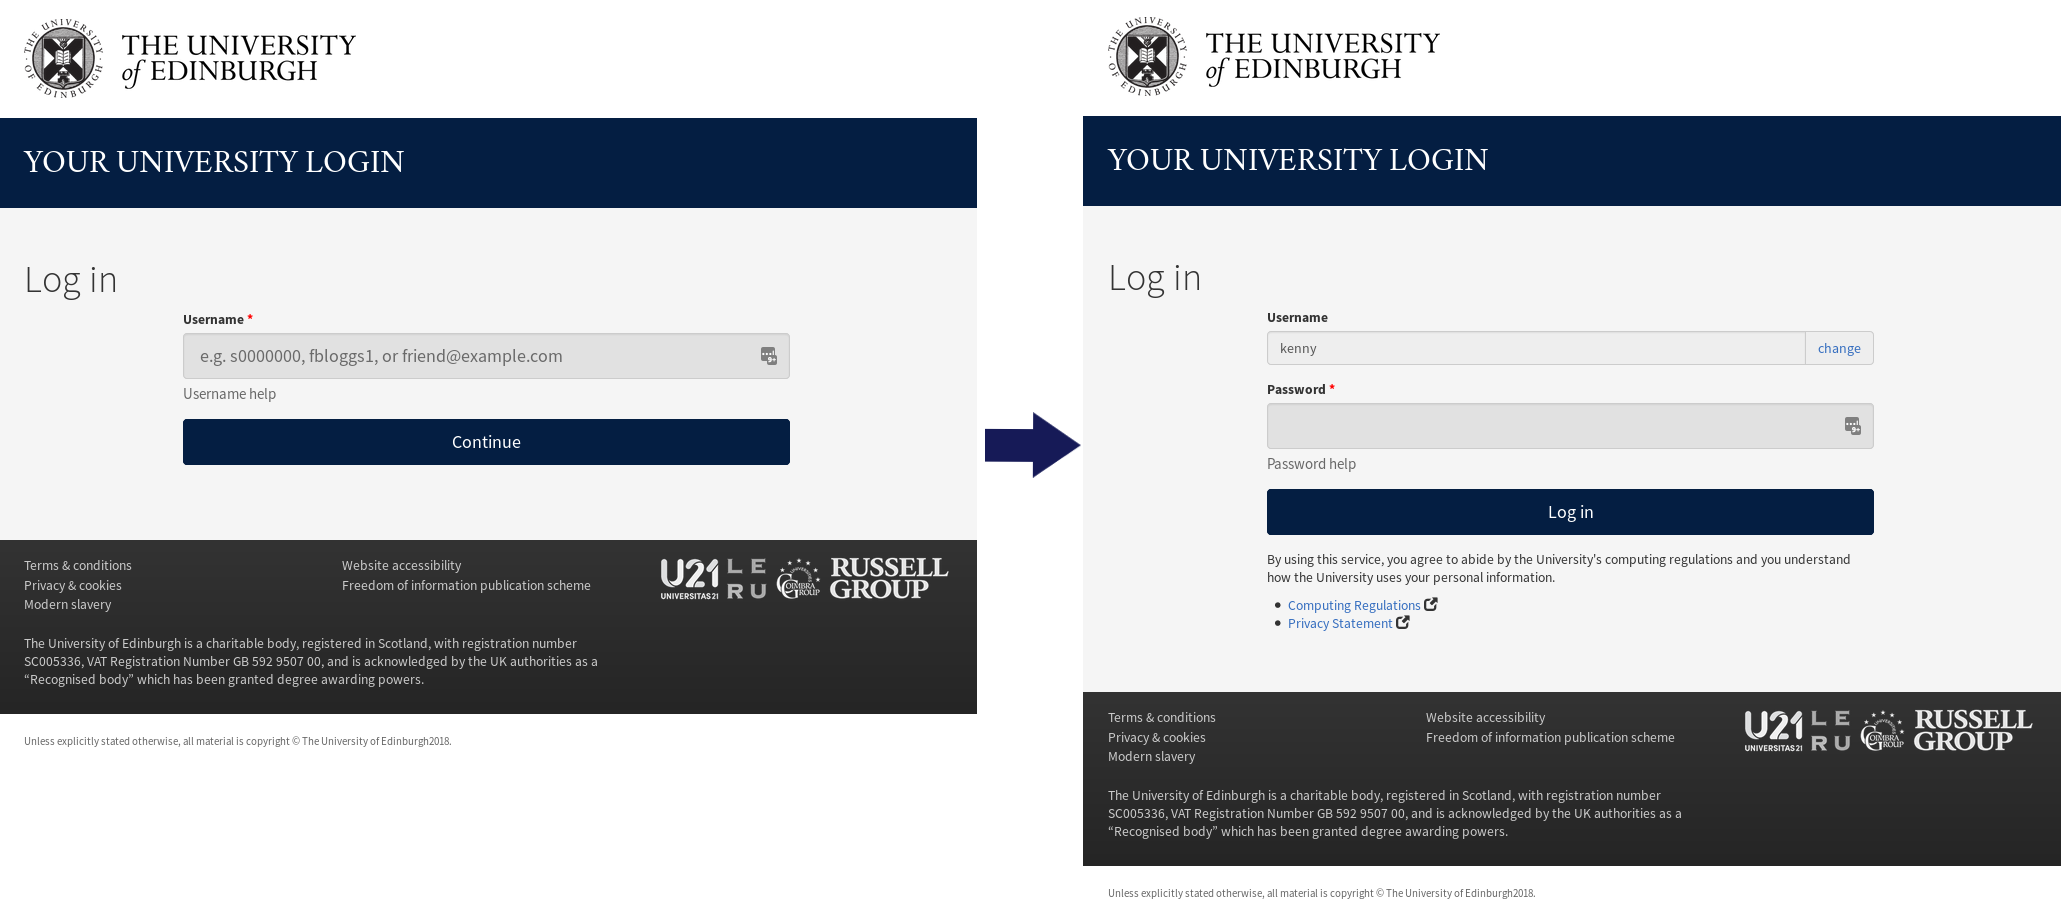 Two screenshots. Left one shows log in page with just Username field. Second shows username and password field